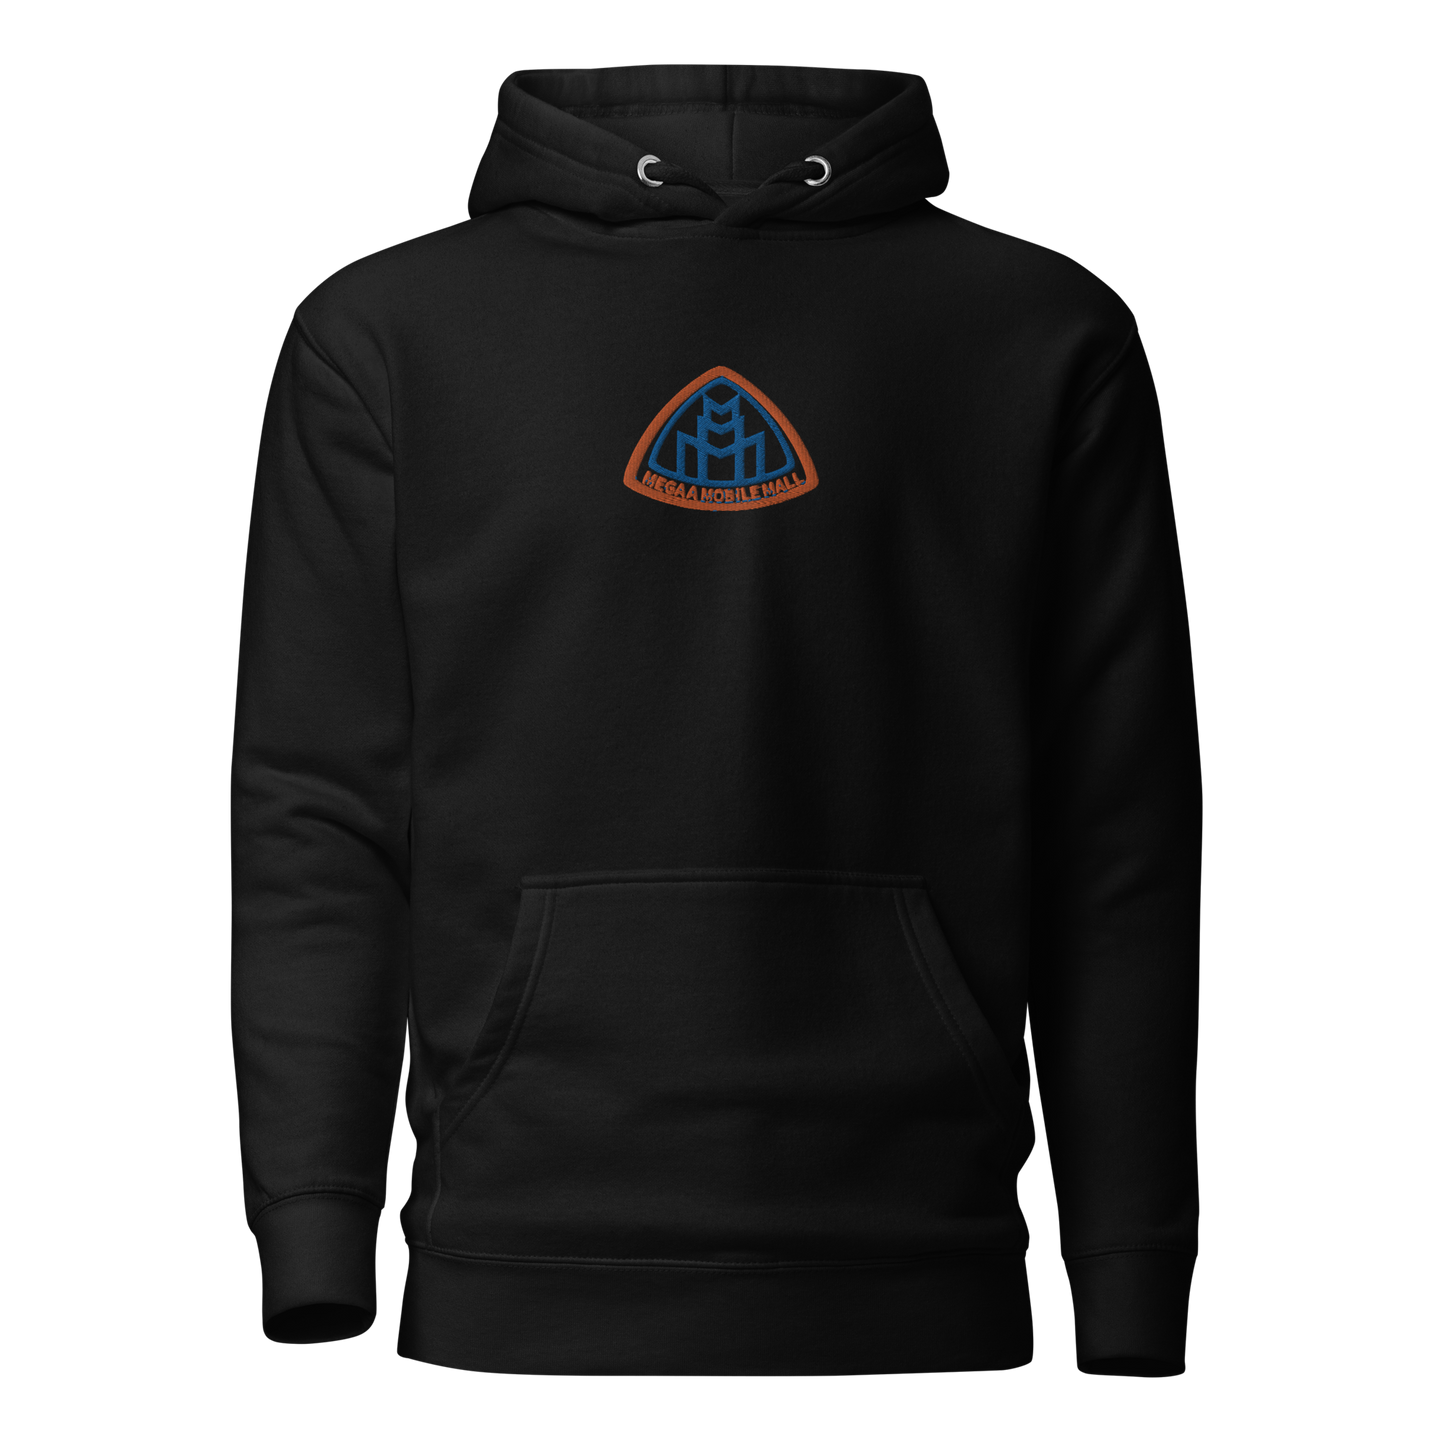 new york colorway megaamobilemall logo stitched black hoodie